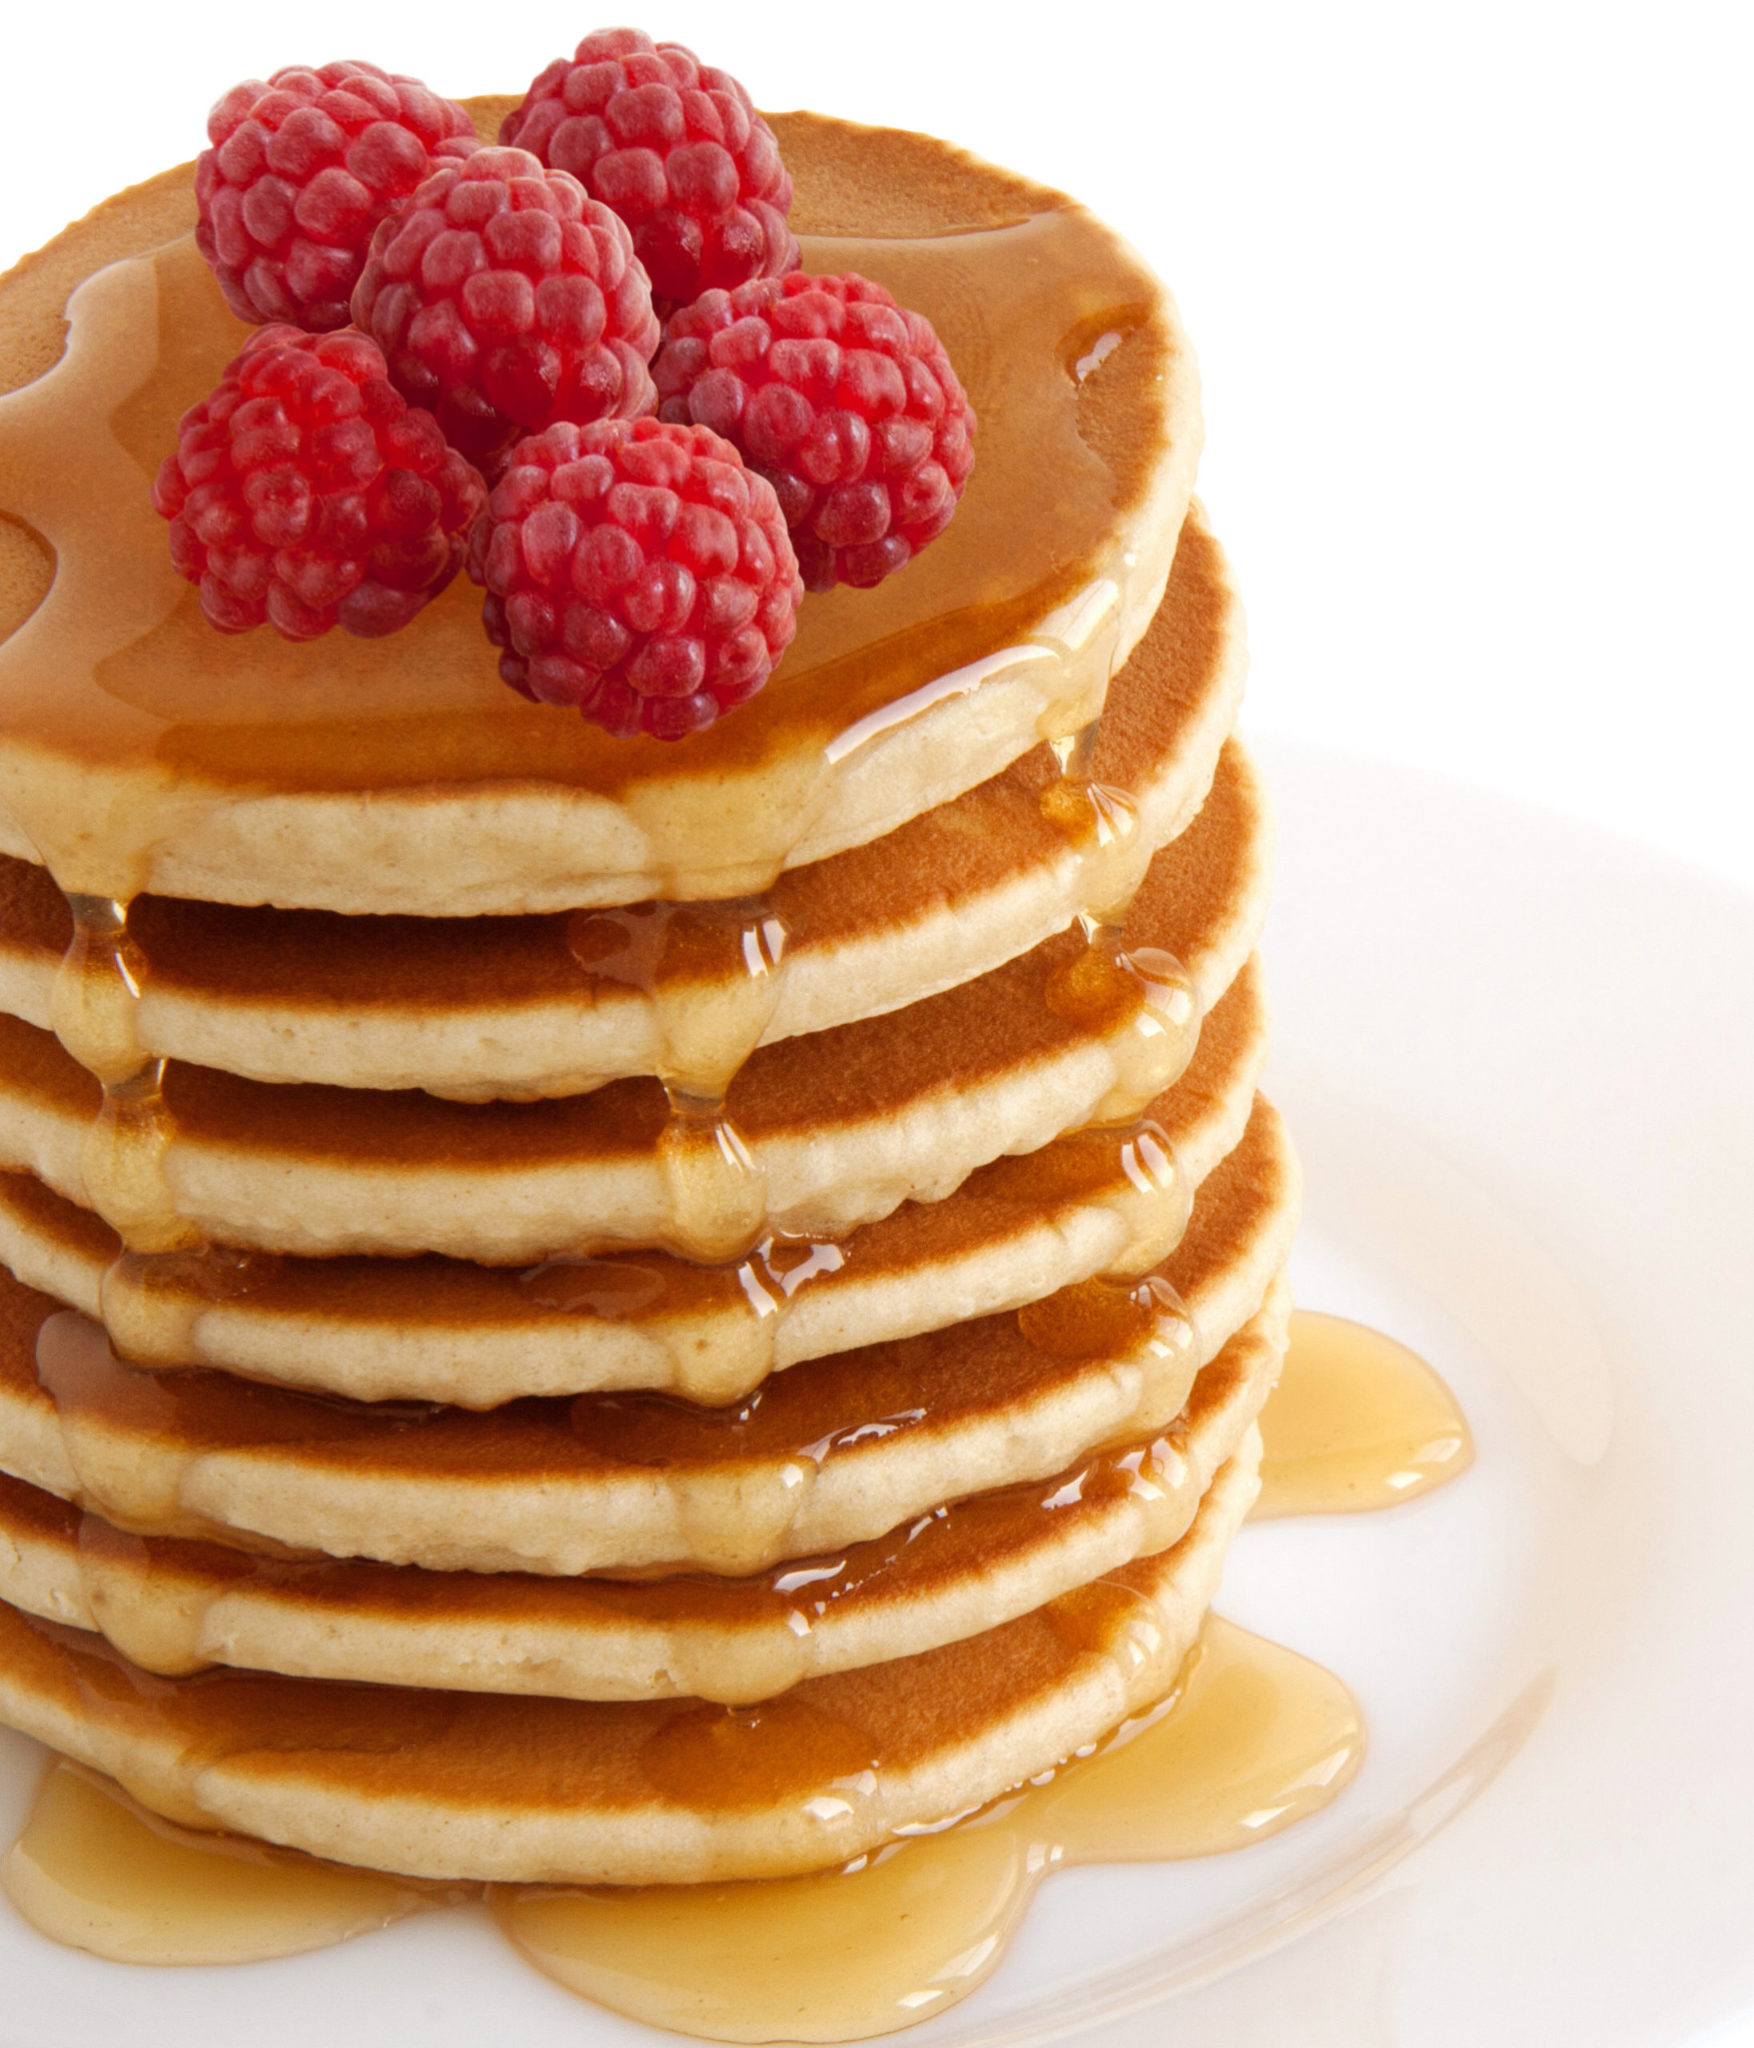 Pancakes Stack With Maple Syrup And Raspberries Isolated On A White Background. Family Breakfast. Brunch. Shrove Tuesday. Mardi Gras. Snacks. Sweets. Food.